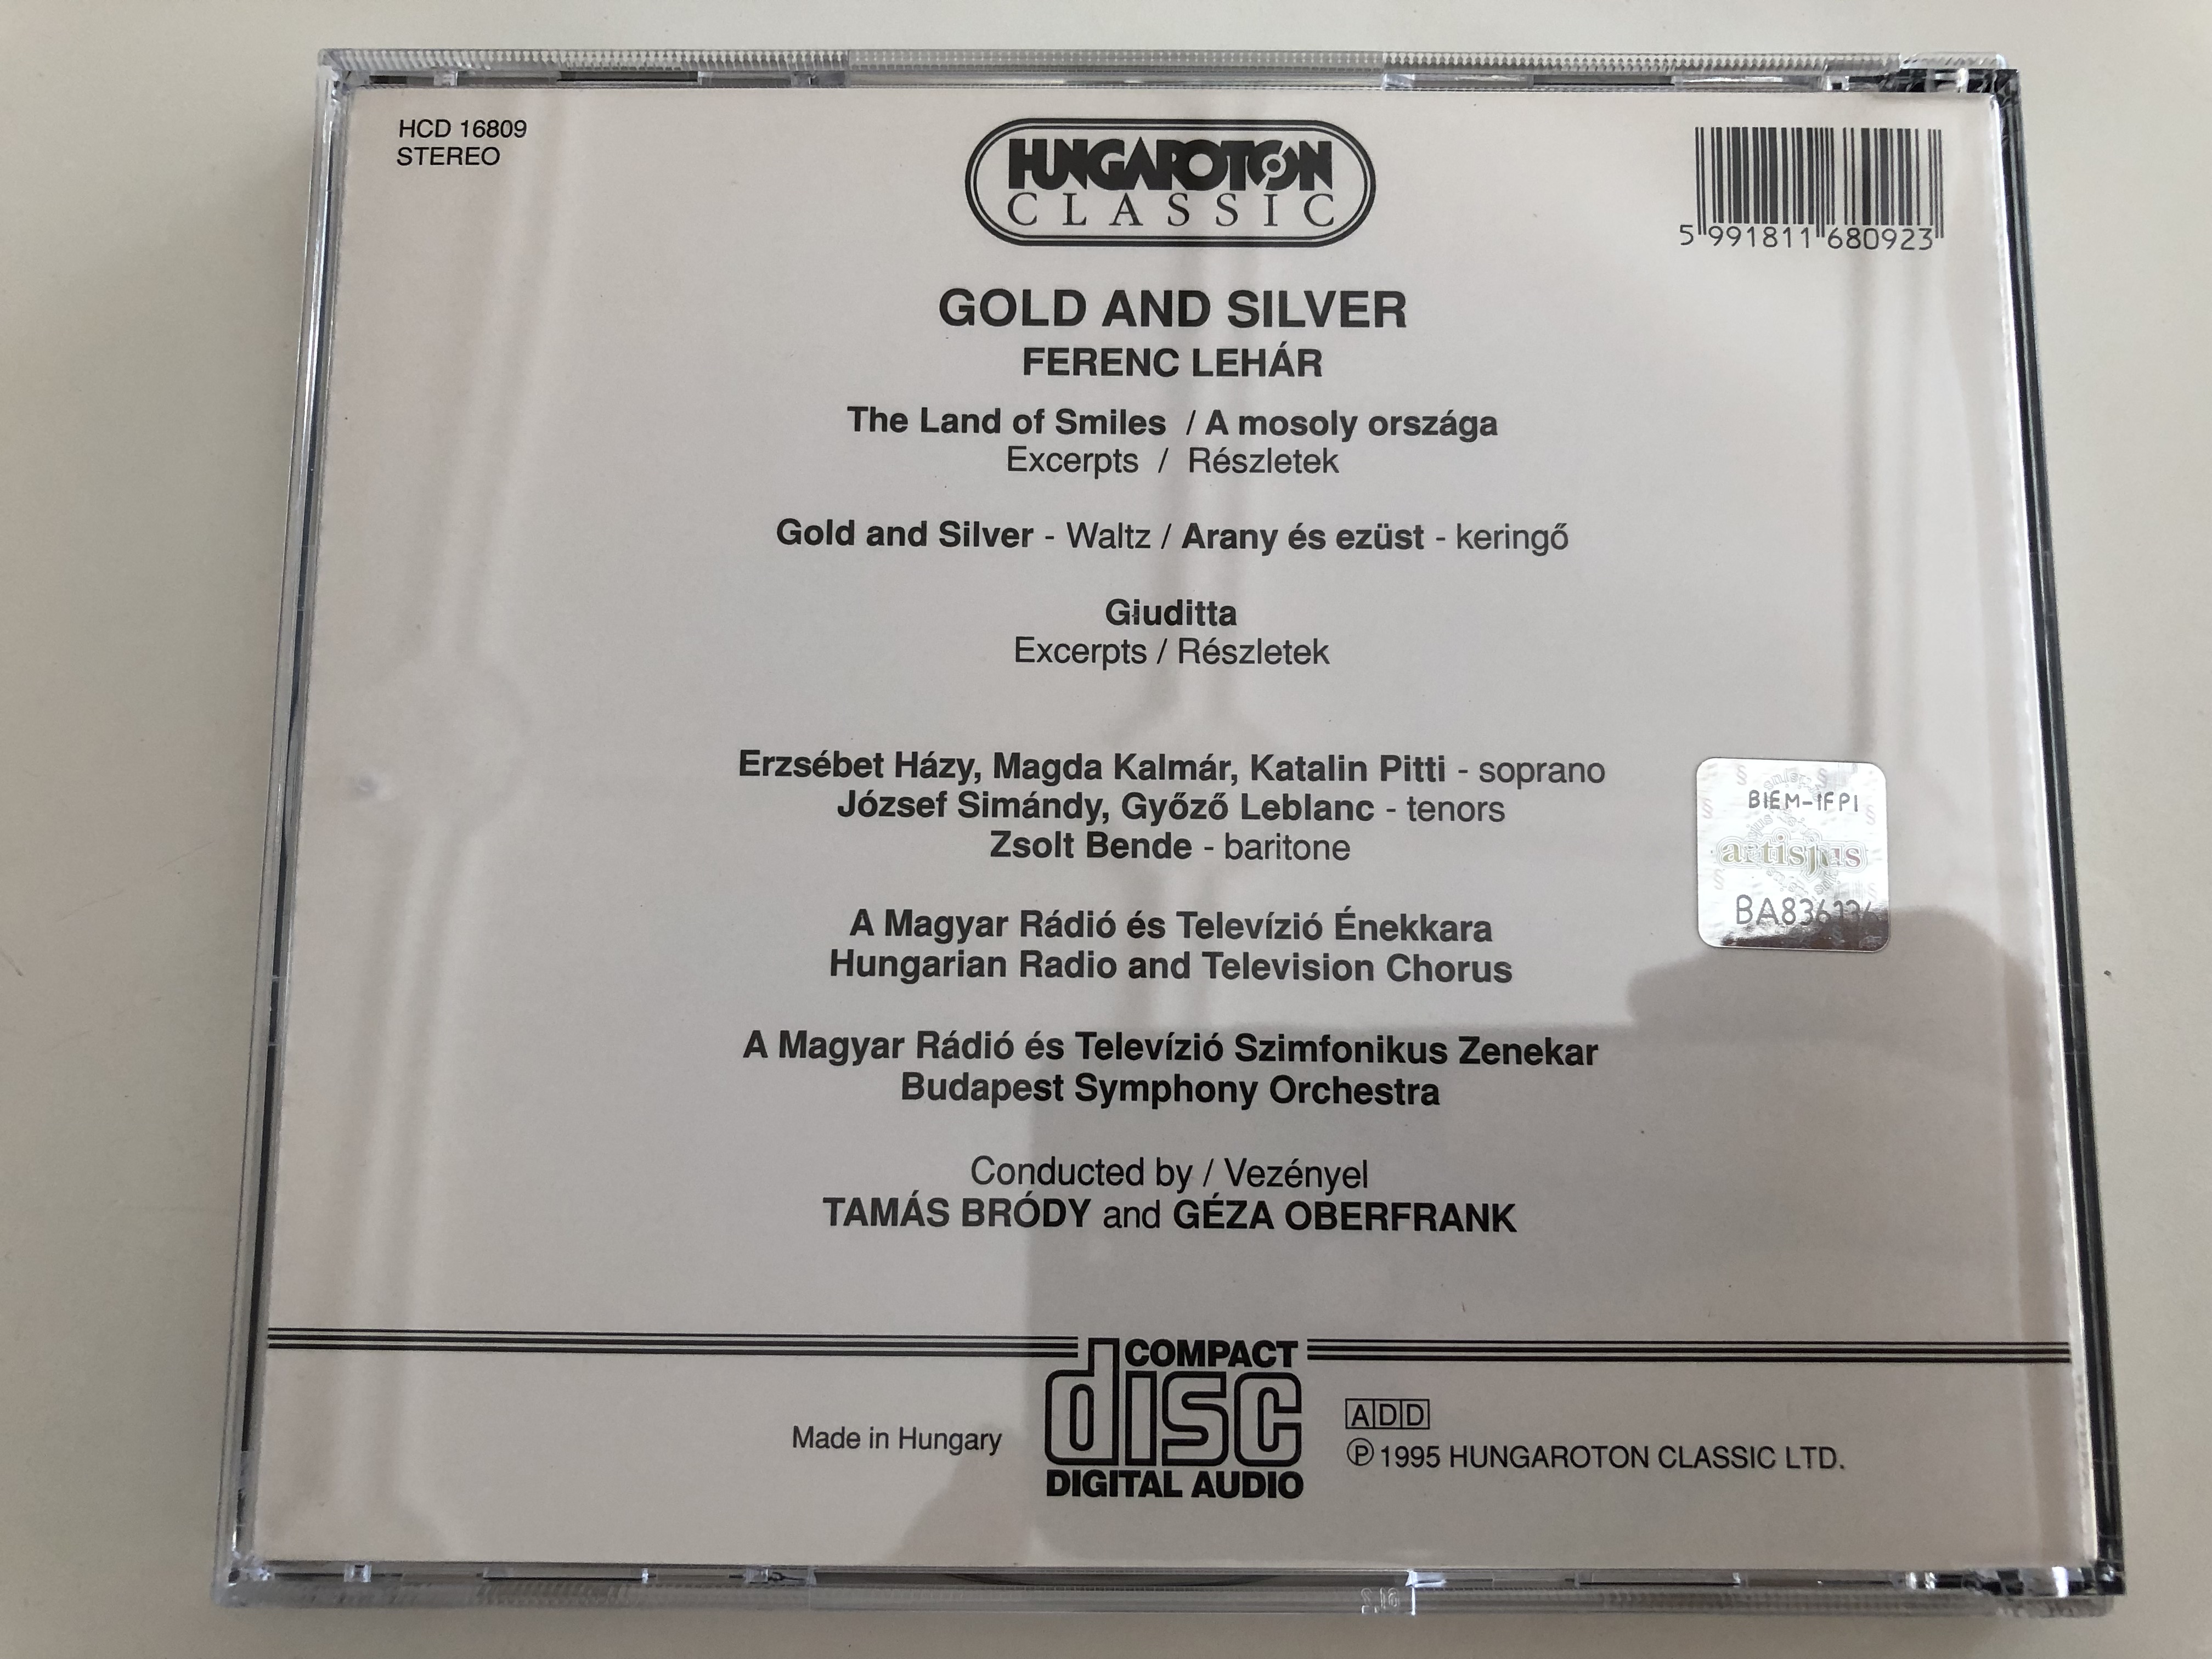 ferenc-leh-r-gold-and-silver-the-land-of-smiles-excerpts-gold-and-silver-waltz-arany-s-ez-st-kering-giuditta-excerpts-hungaroton-classic-audio-cd-1995-hcd-16809-6-.jpg